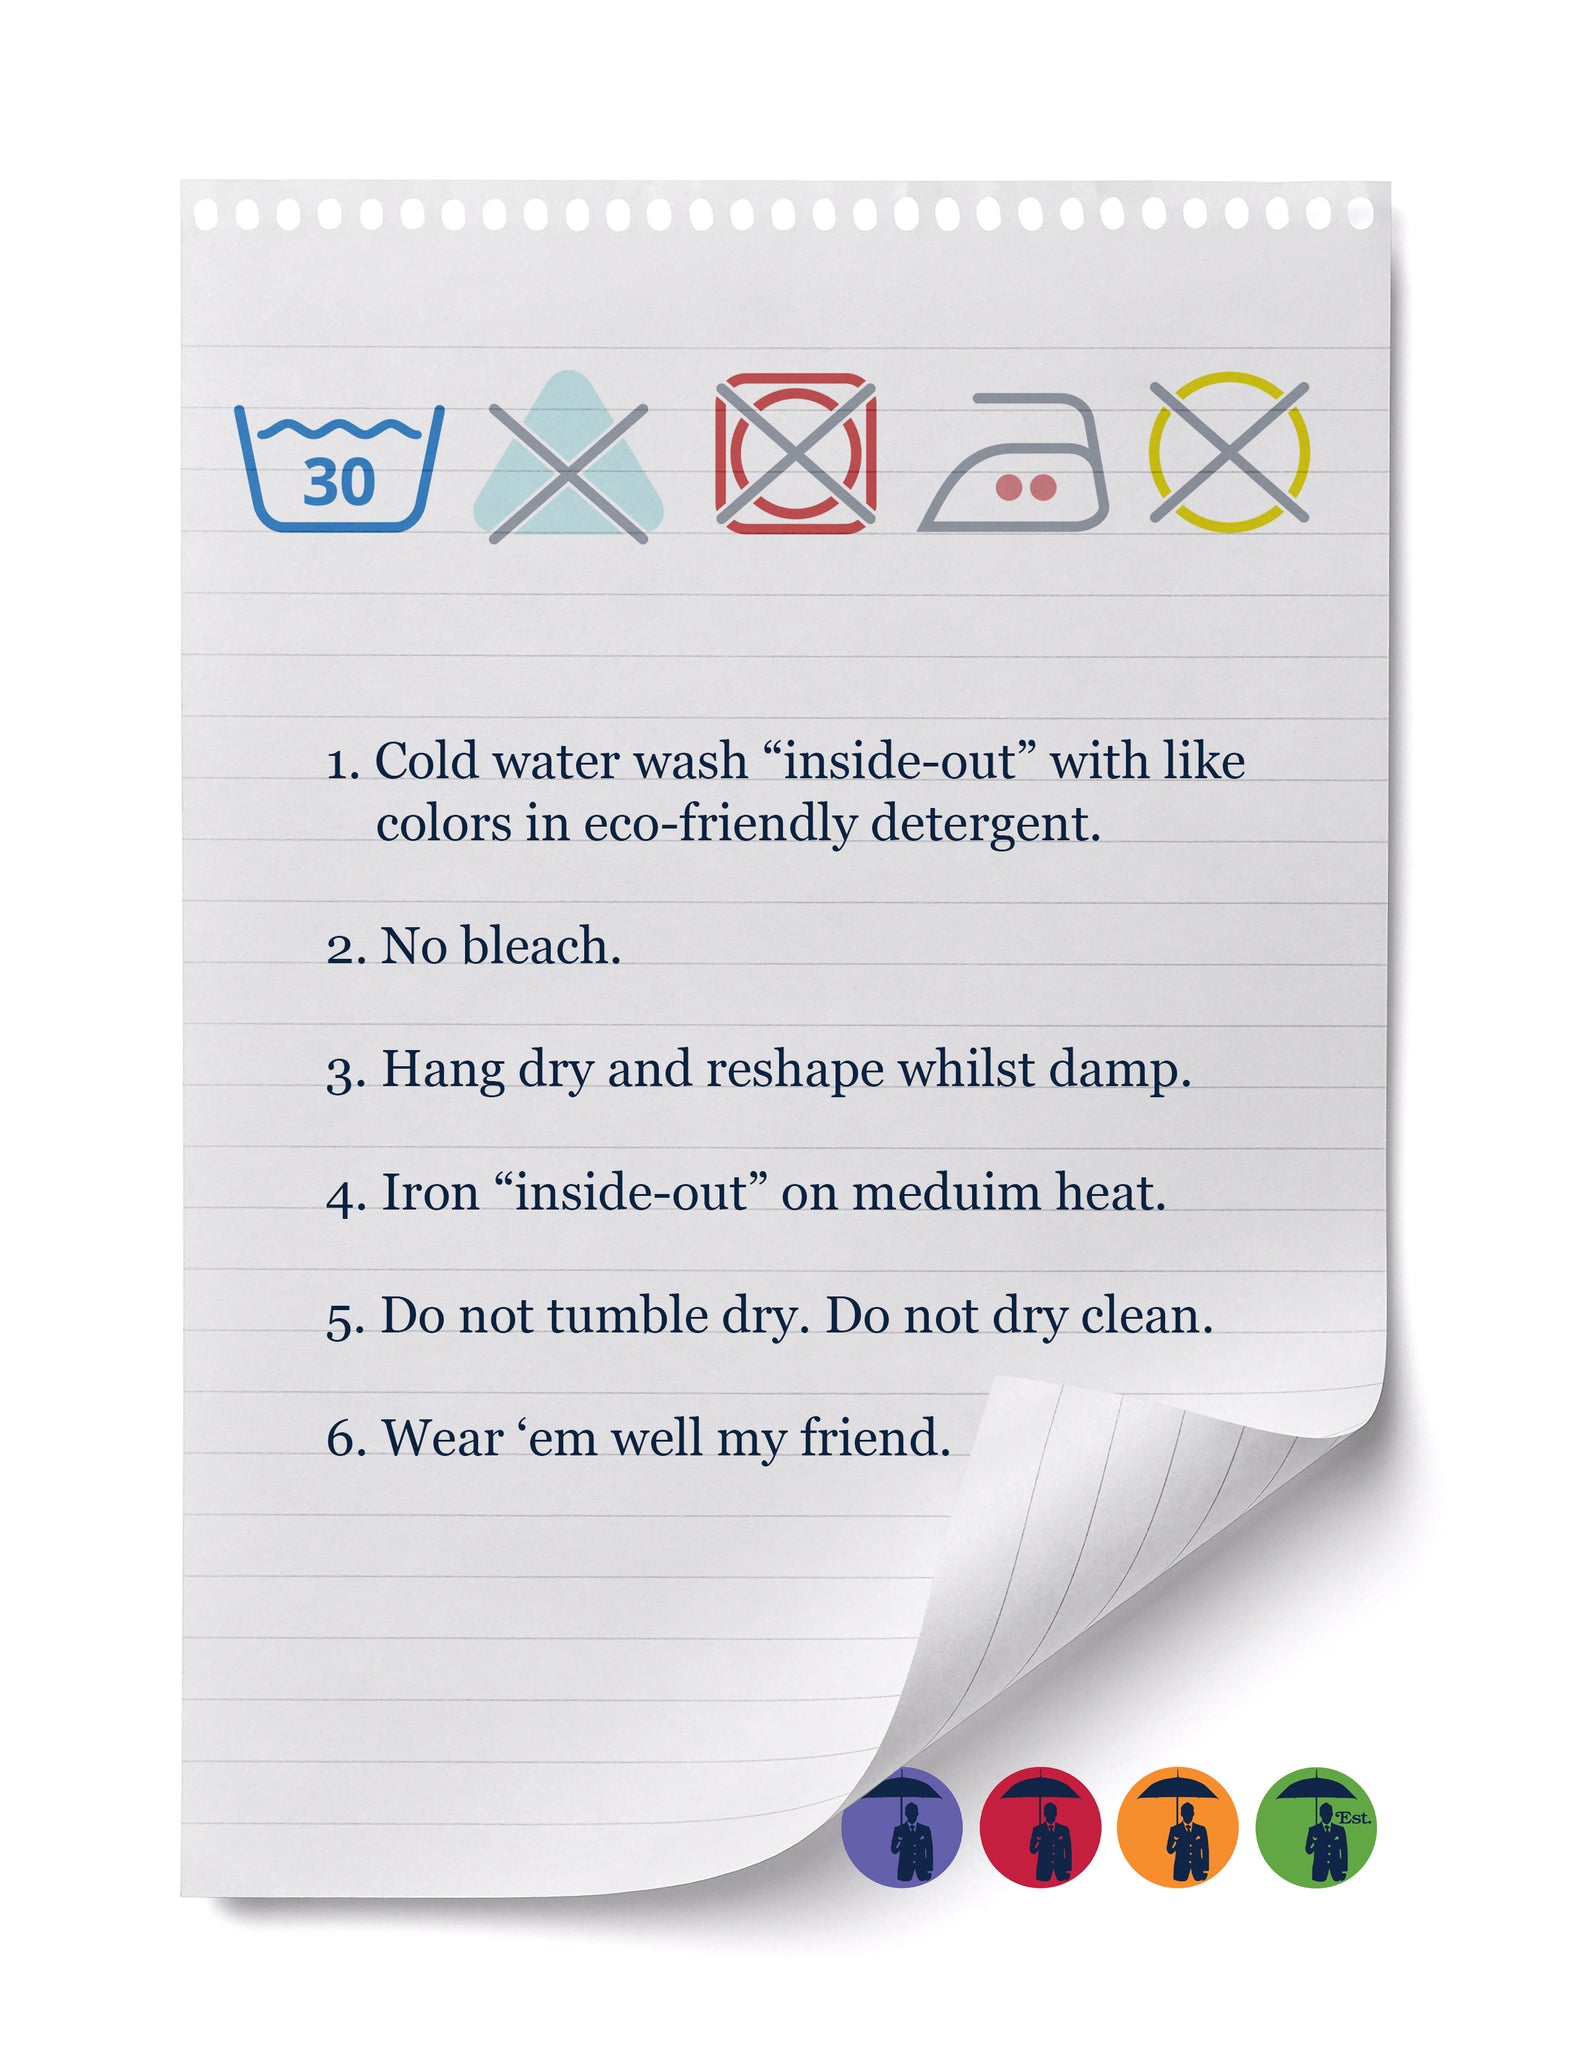 1. Cold water wash “inside-out” with like colors in eco-friendly detergent.  2. No bleach.  3. Hang dry and reshape whilst damp.  4. Iron “inside-out” on meduim heat.  5. Do not tumble dry. Do not dry clean.  6. Wear ‘em well my friend.